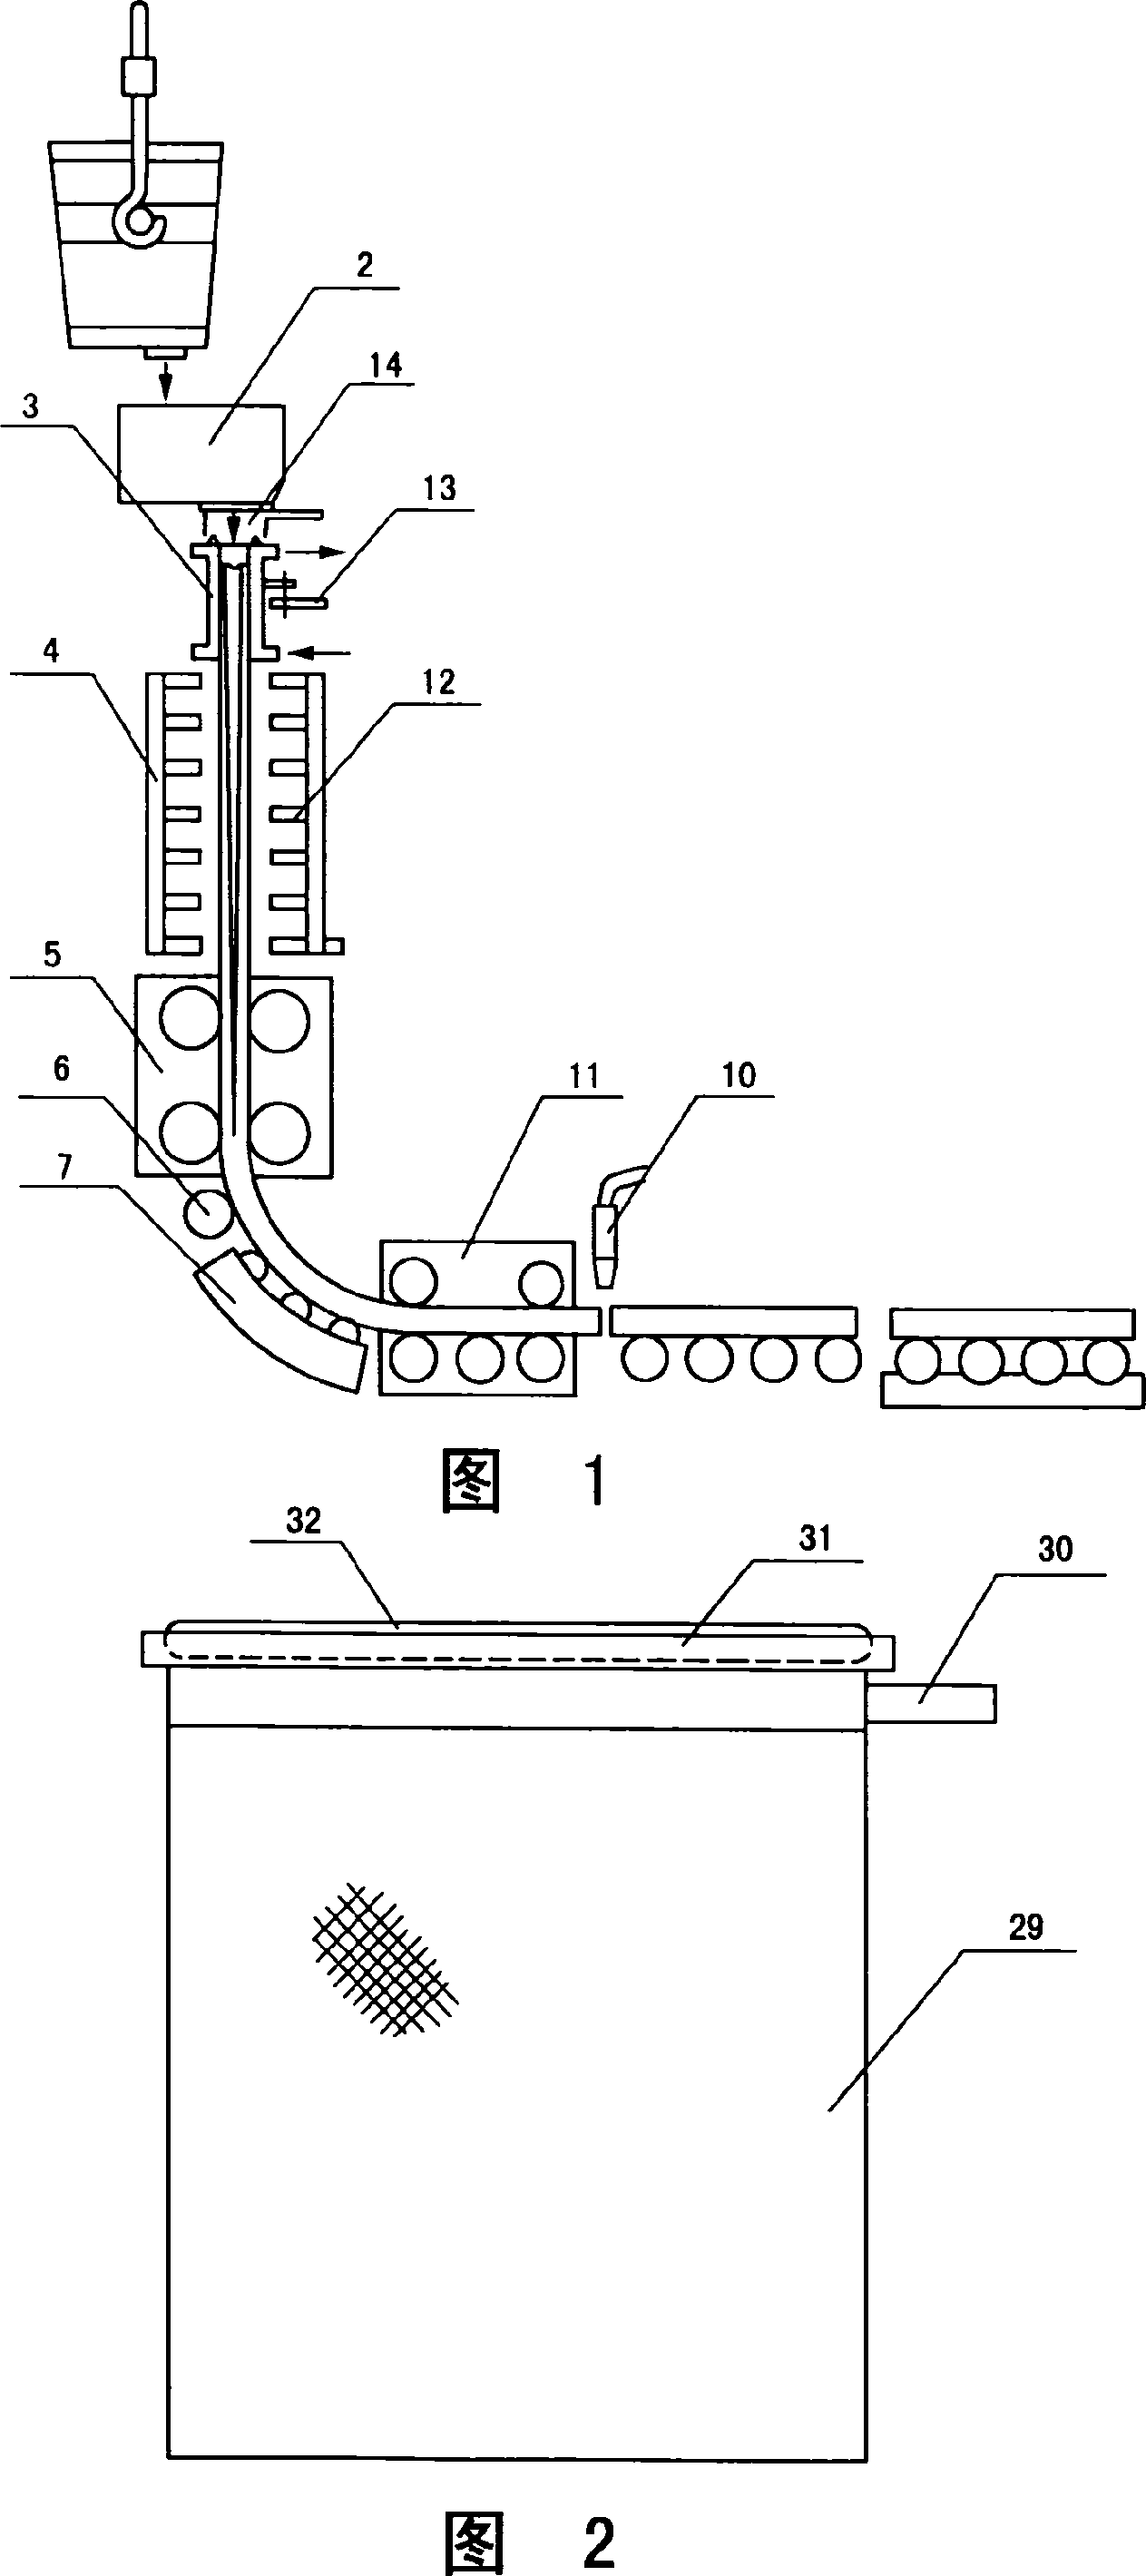 Continuous steel billet casting process and apparatus